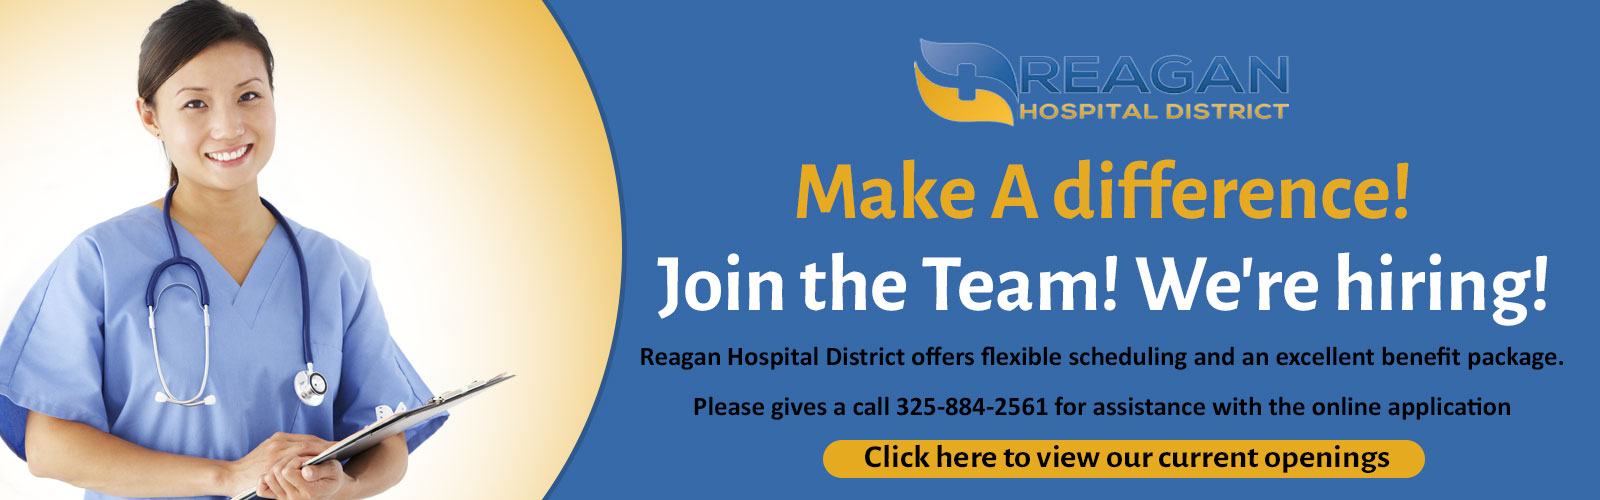 Banner picture of a female Nurse smiling. She is holding a clipboard. Banner says:

REAGAN HOSPITAL DISTRICT
Make A Difference!
Join the team! We're hiring!
Reagan Hospital District offers flexible scheduling and an excellent benefit package.
Please give us a call 325-884-2561 for assistance with the online application
(((Click here to view our current openings)))